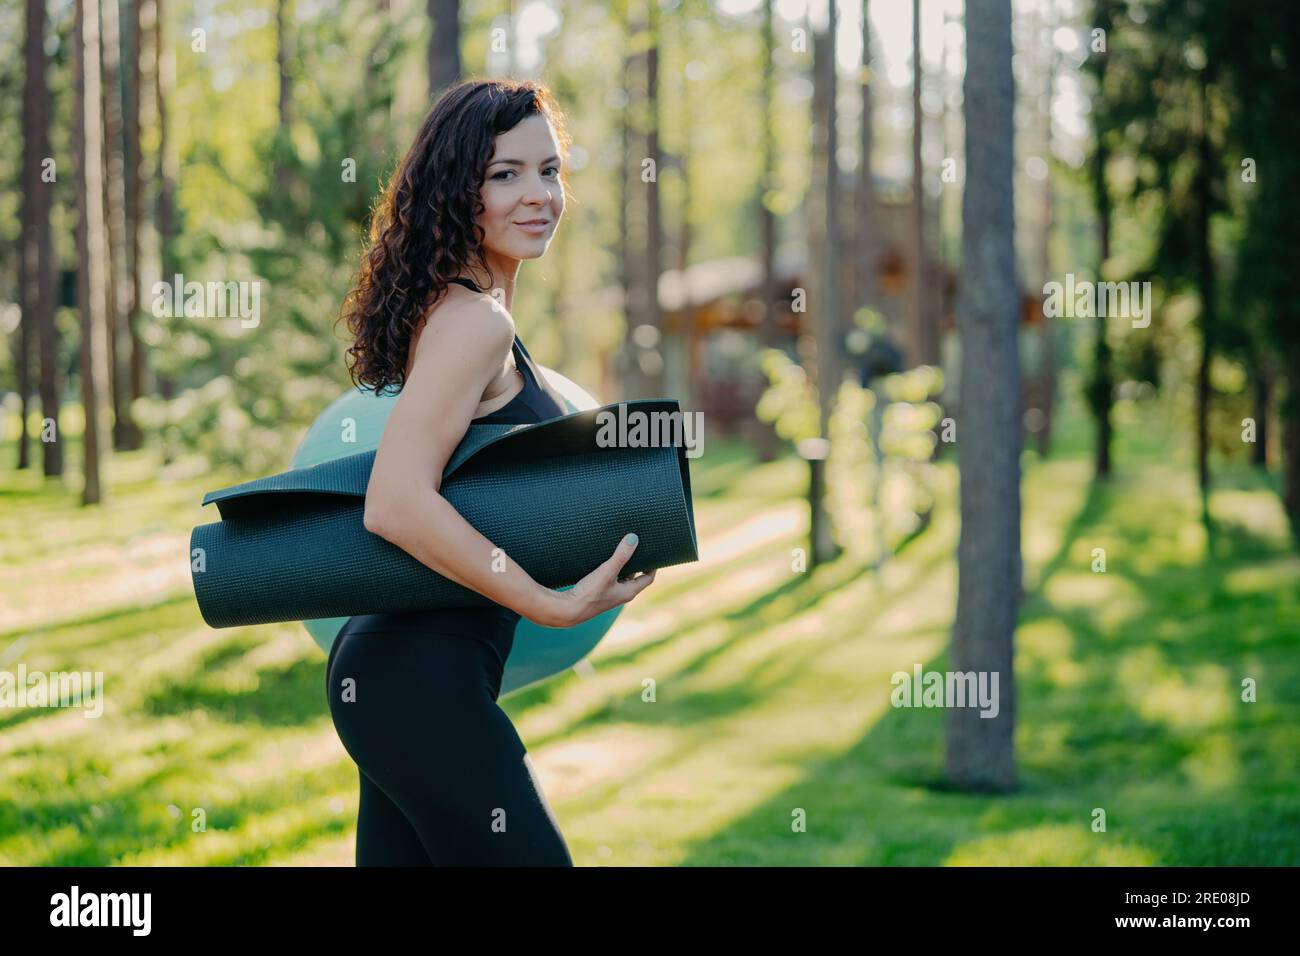 Slim sporty woman carries karemat under arm, dressed in black leggings. Poses against green grass and trees, ready for fitness ball exercises. Stock Photo